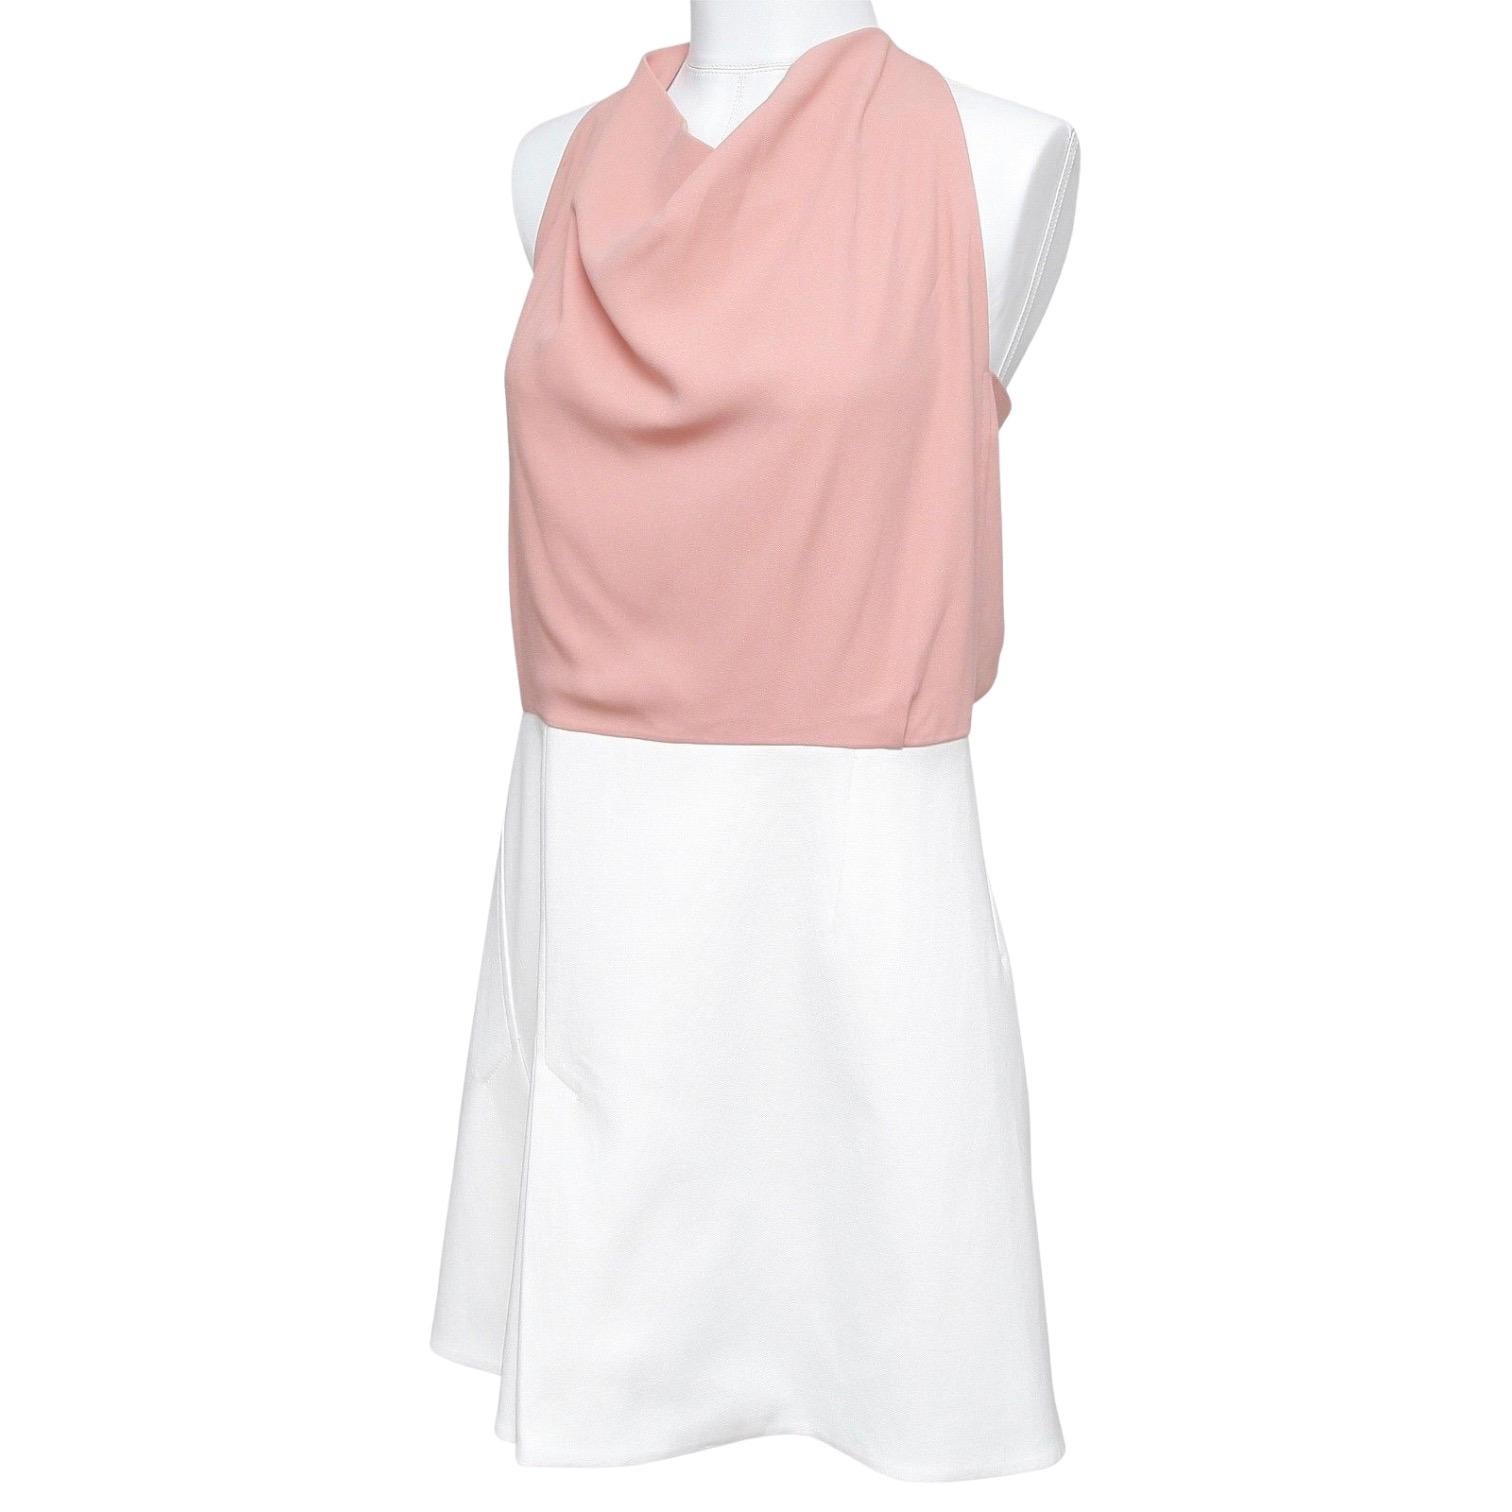 Beige ROLAND MOURET Sleeveless Dress Cowl Neck 2016 PAGET White Pink 14 BNWT $1230 For Sale